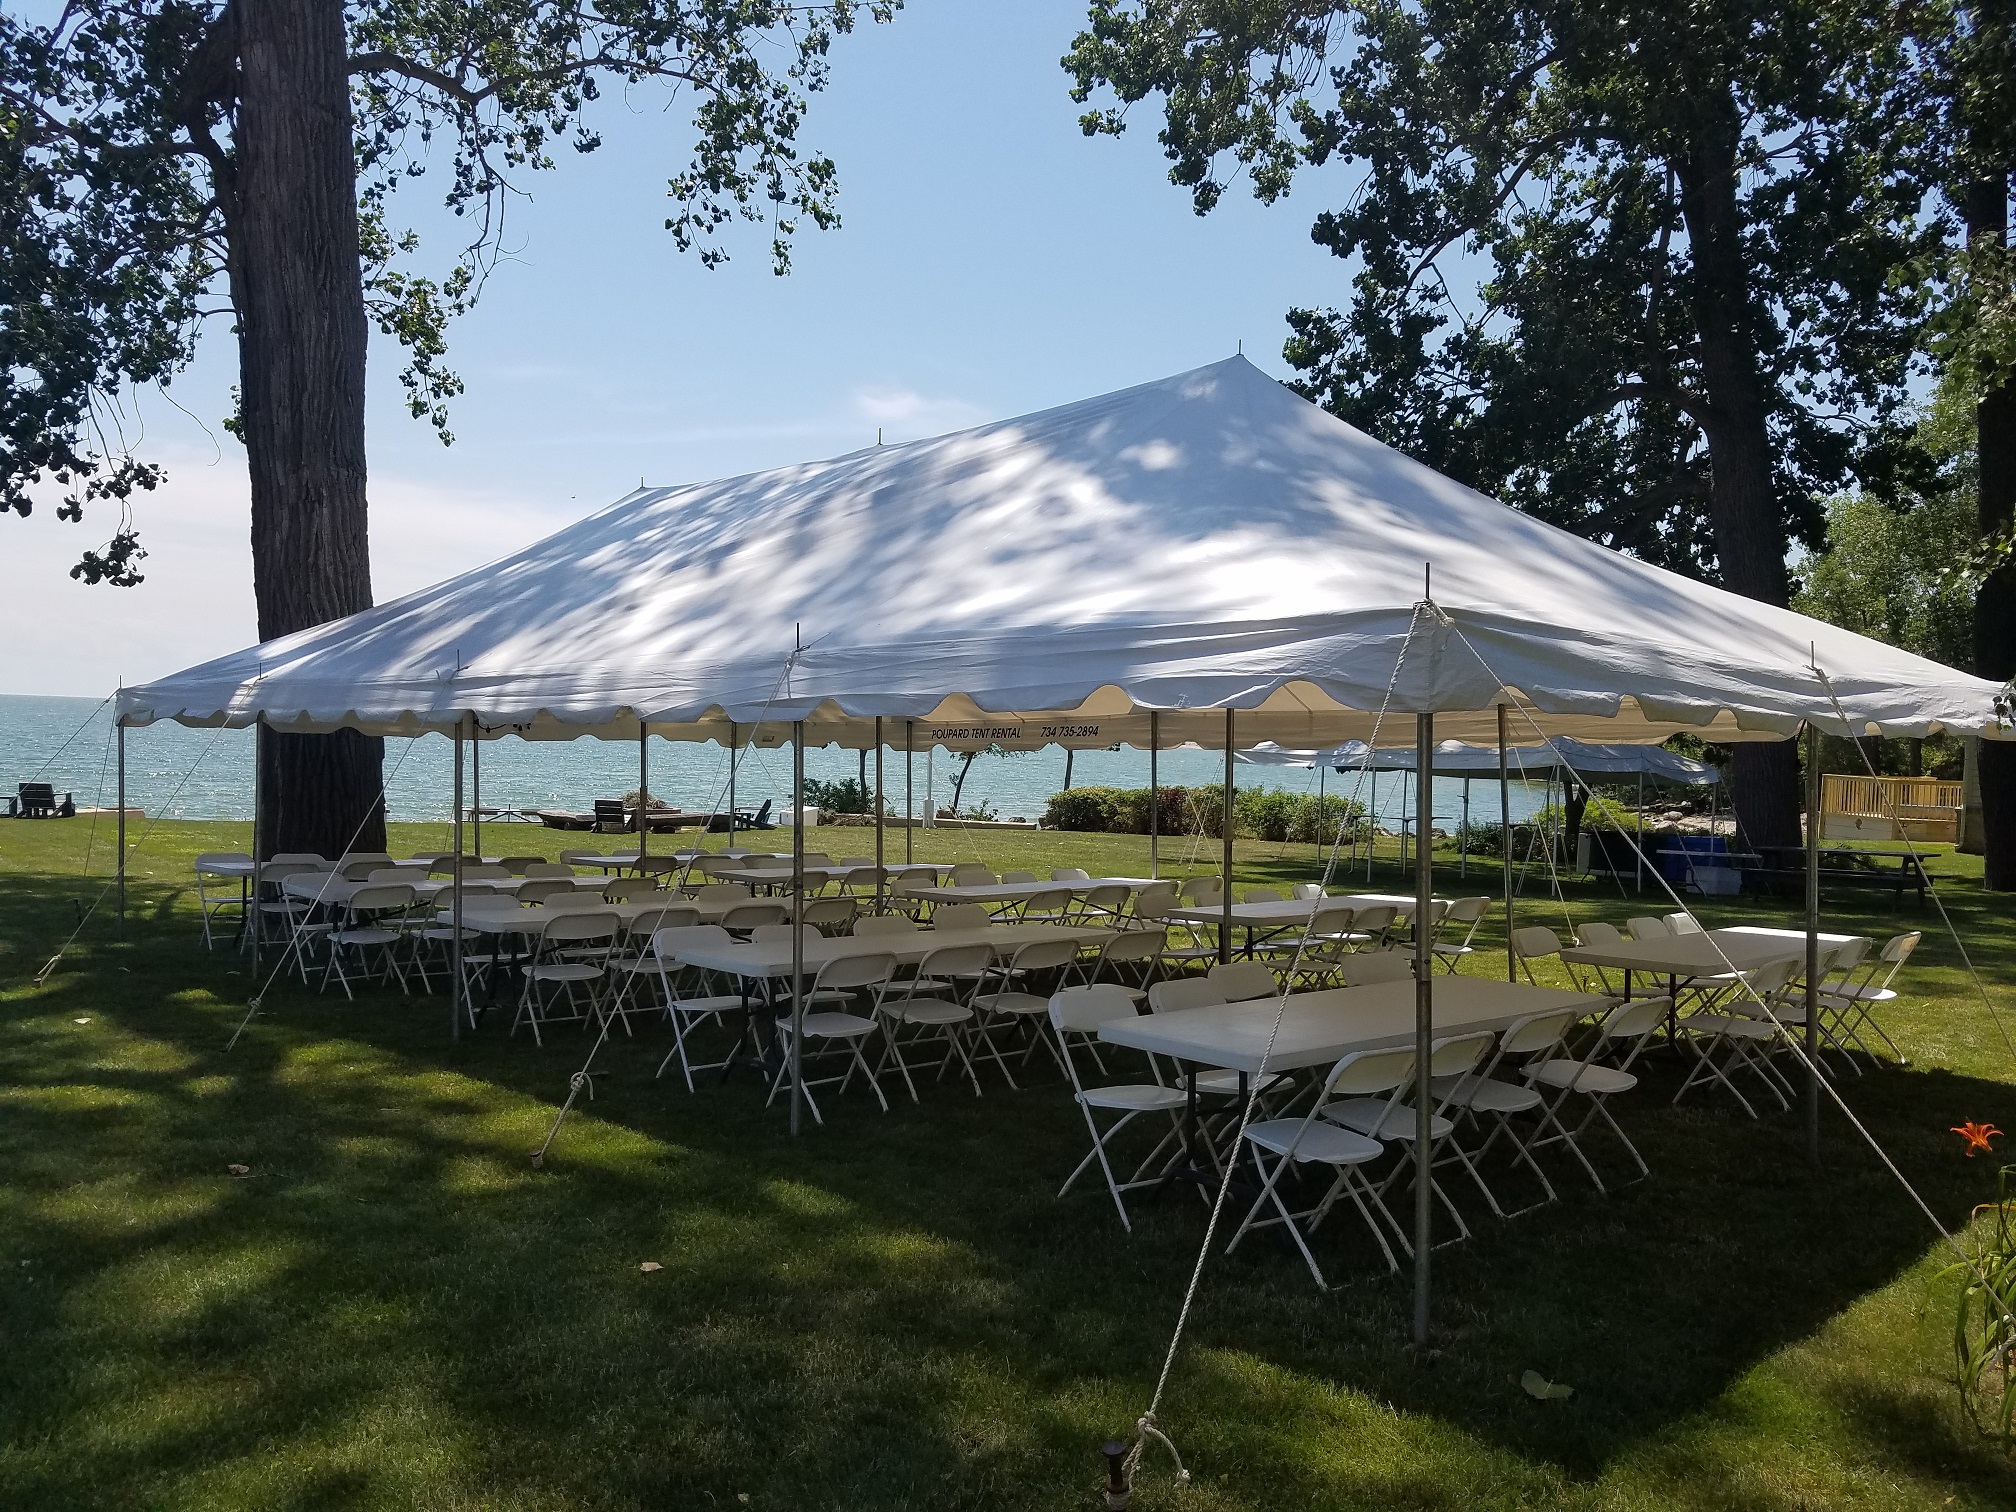 A picture of tent rentals set up in Monroe County, MI